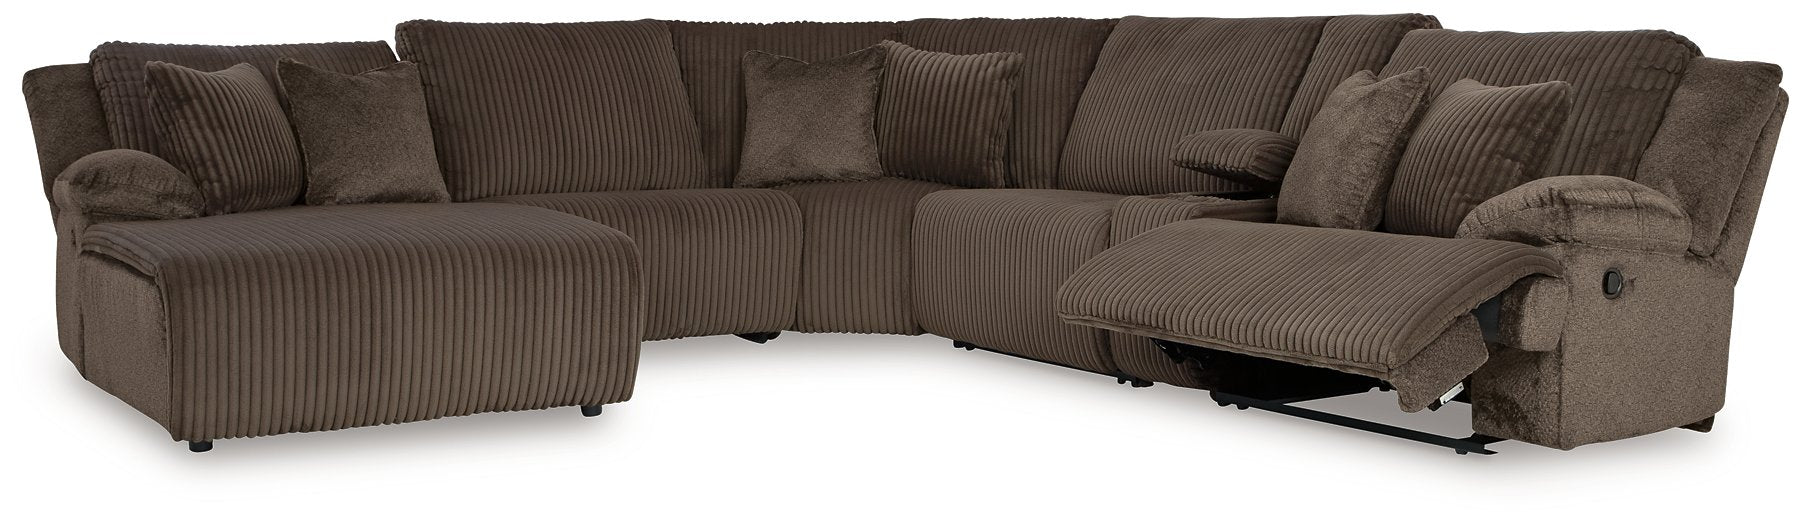 Top Tier Reclining Sectional with Chaise